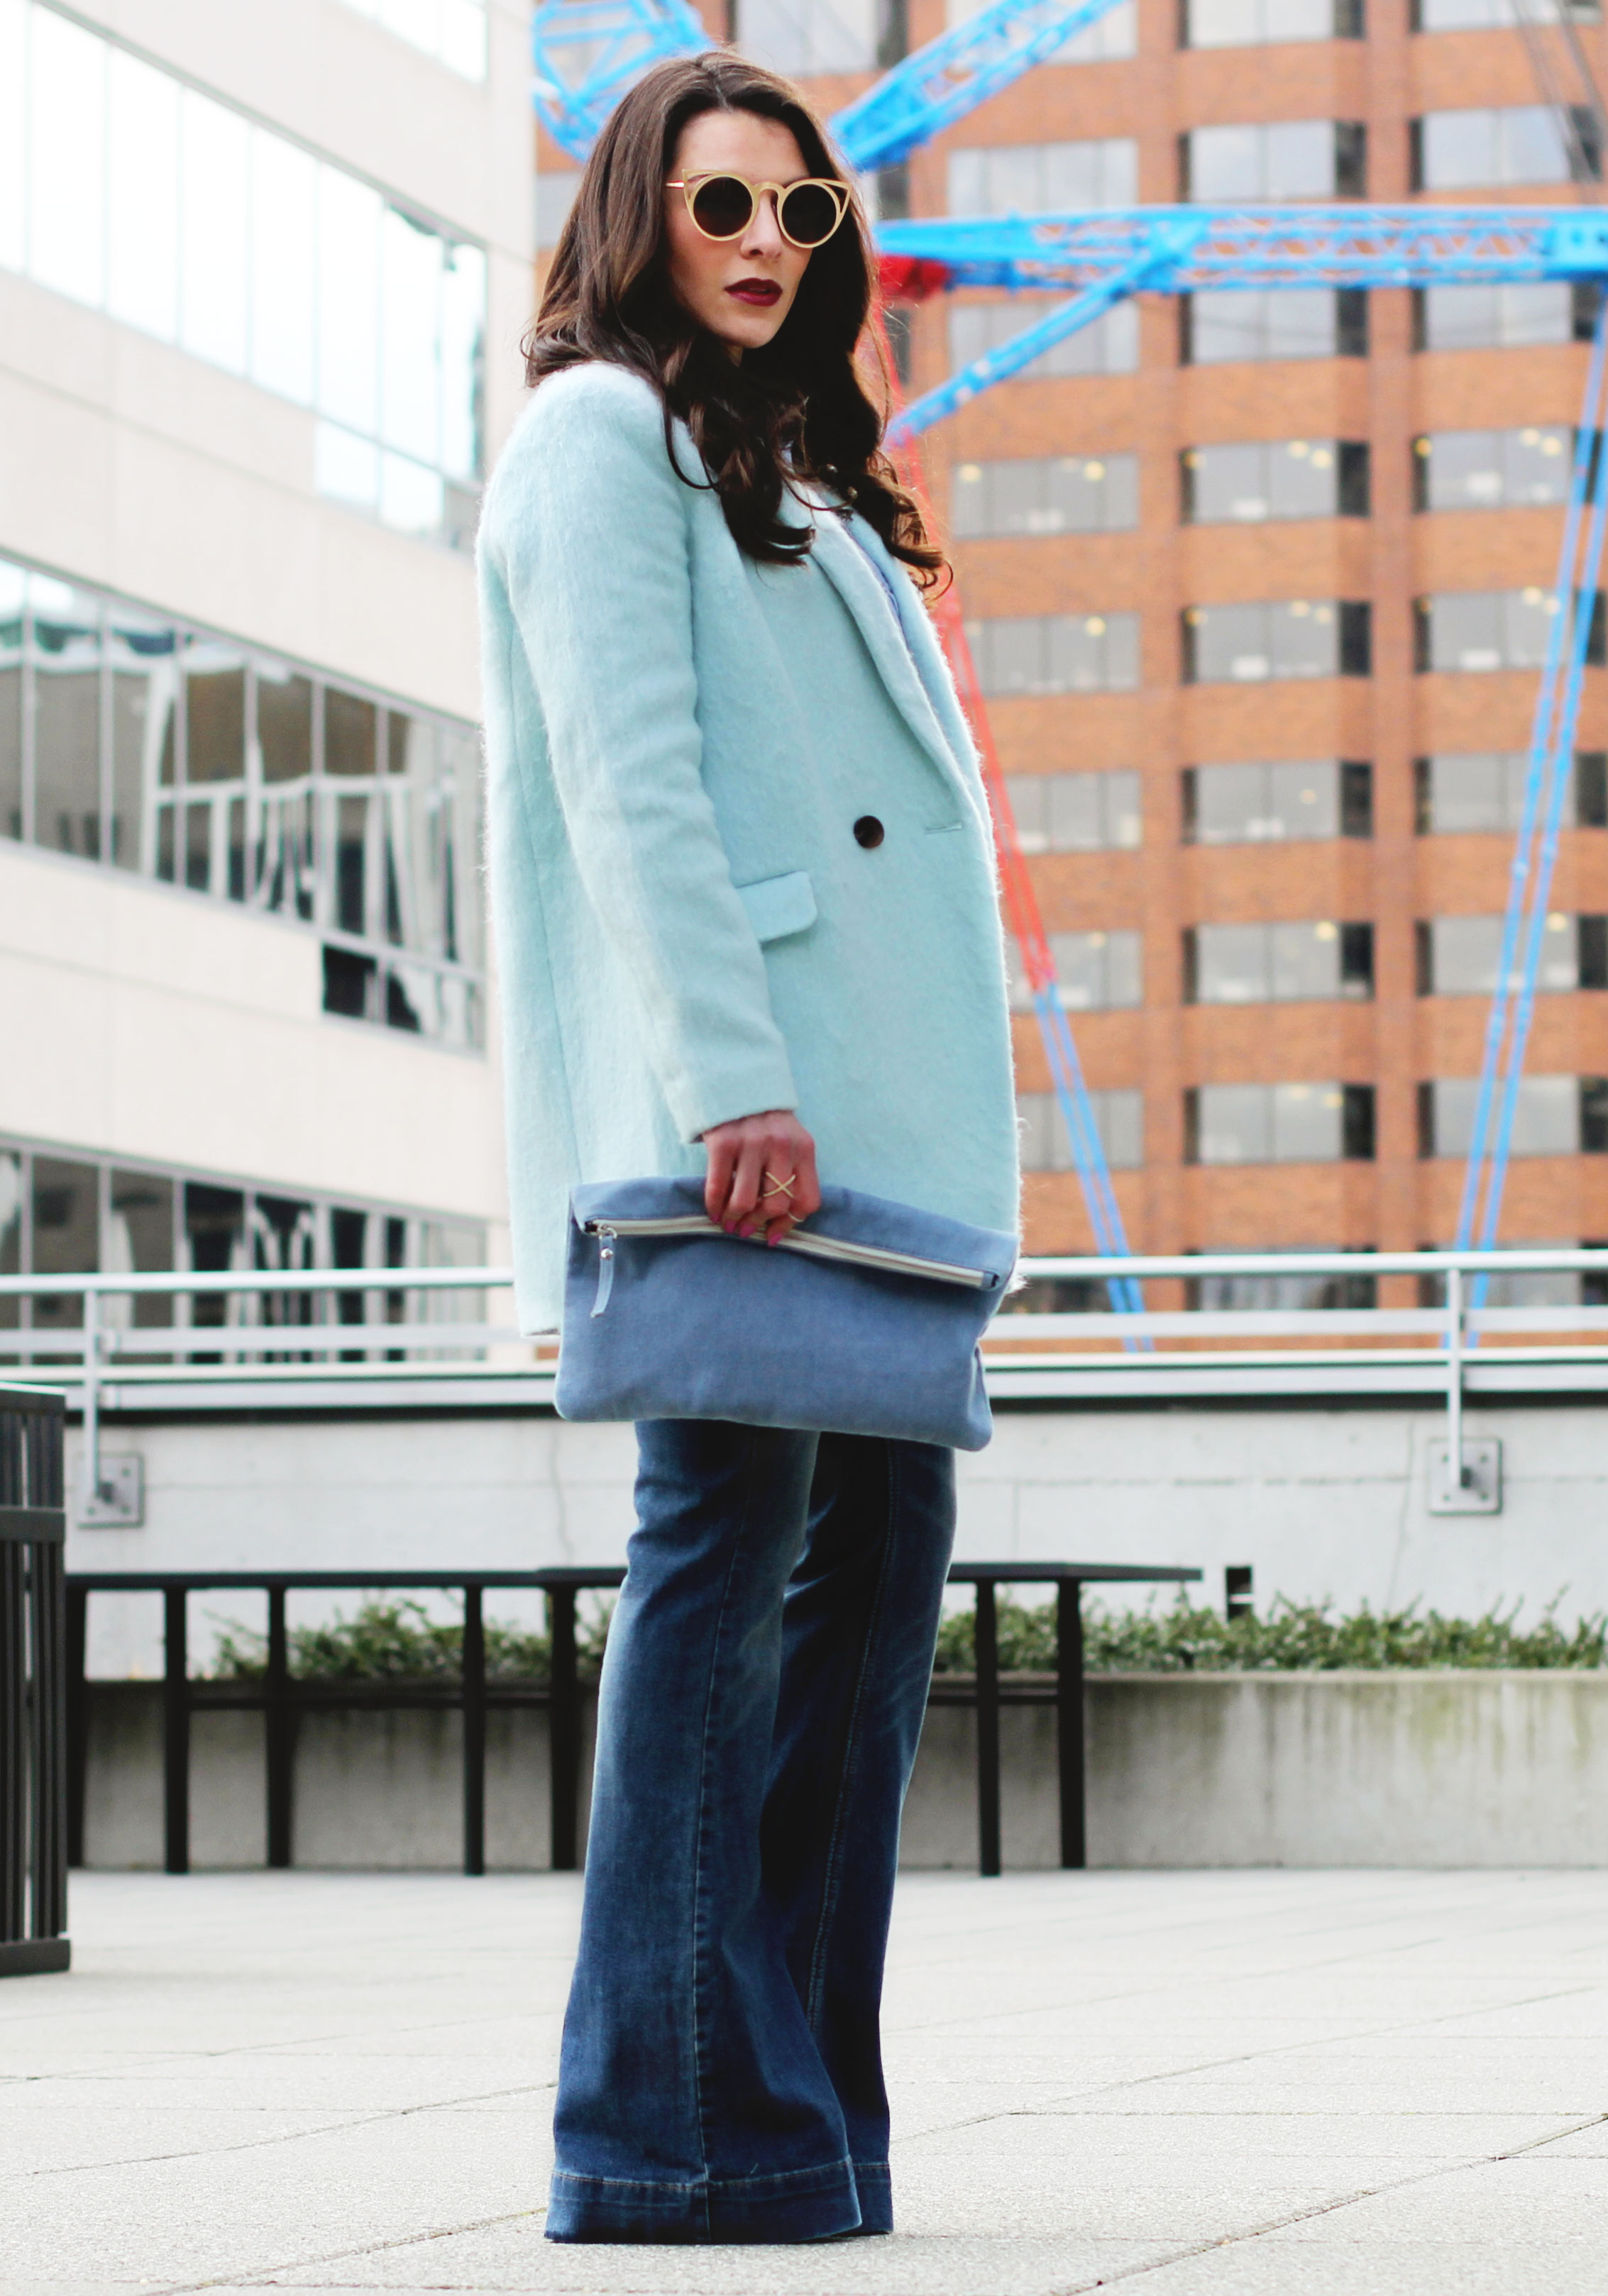 Winter Outfit, All Denim Canadian Tuxedo, Flare Jeans, $10 Gold Cat Eye Sunglasses, Mint Green Coat